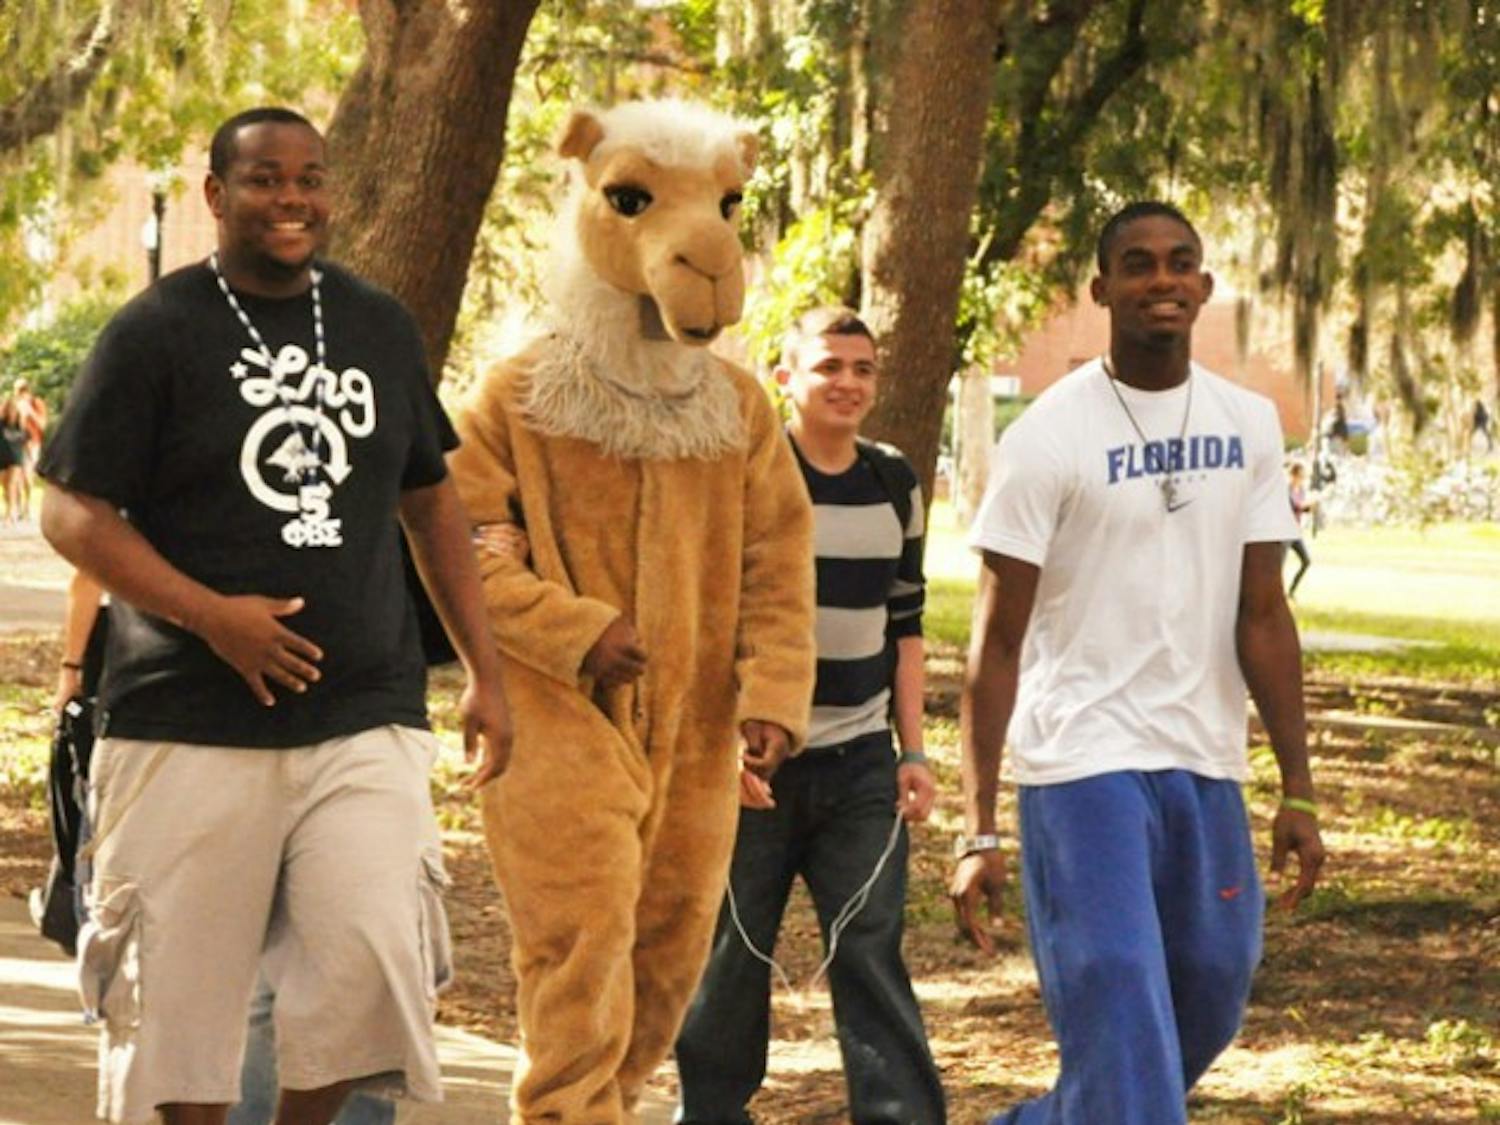 Junior Chris Haugabook, 21, sophomore Francisco Hidalgo, 19, and sophomore Eddie Lovett, 19, walk with Humpty, the mascot of Phi Beta Sigma Fraternity, to Turlington Plaza to promote their toy drive.